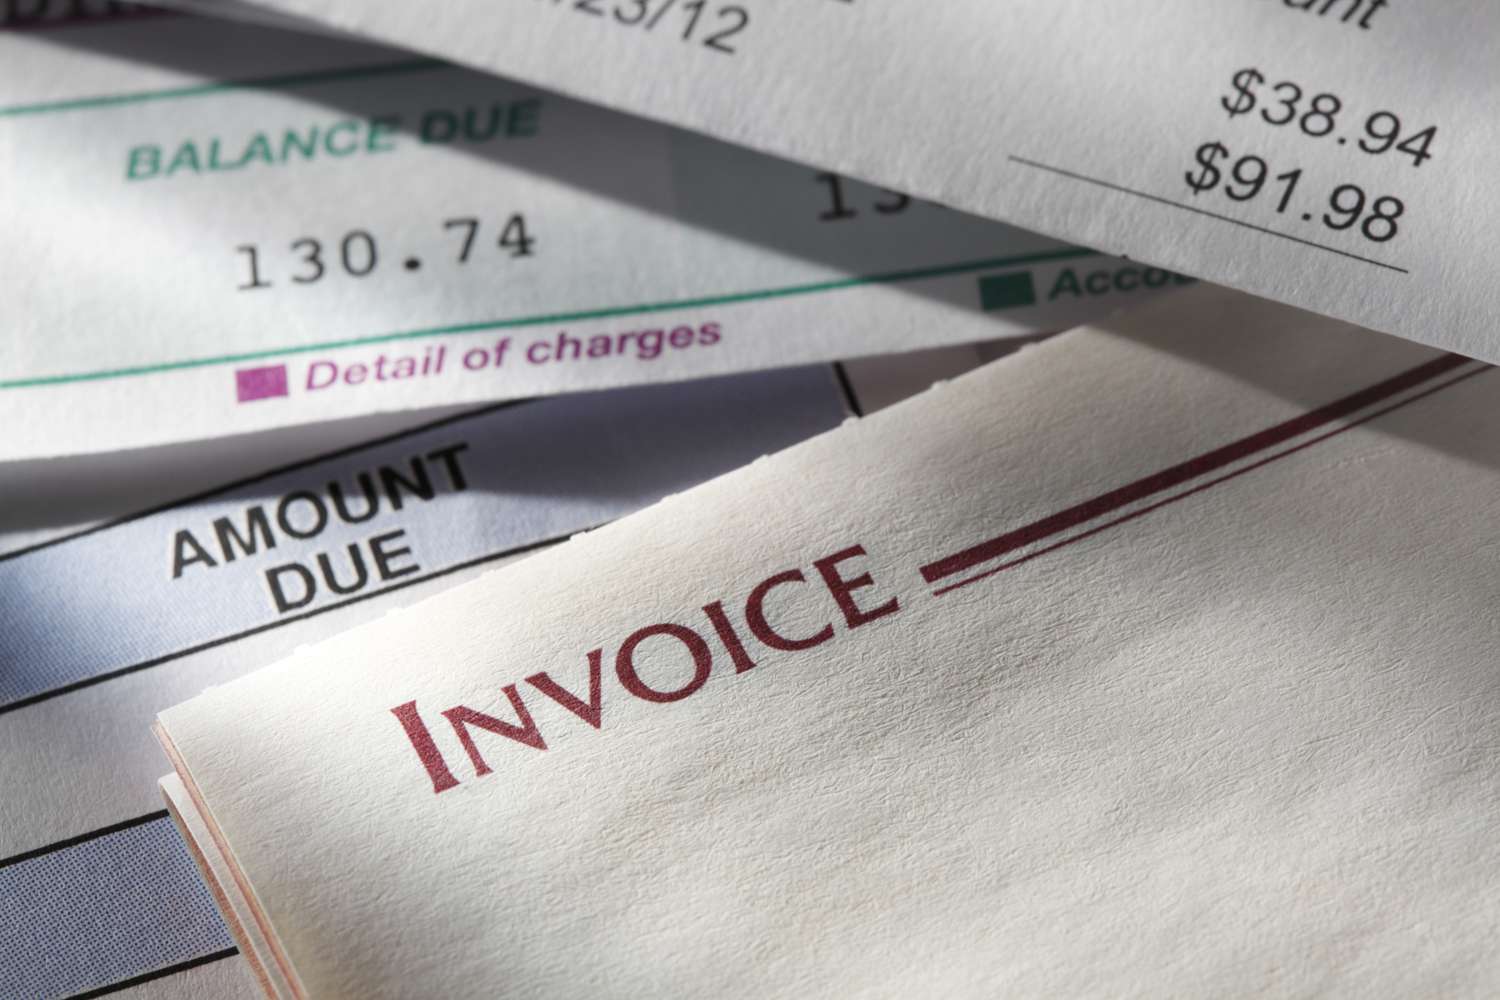 invoices and bills from a financial advisor